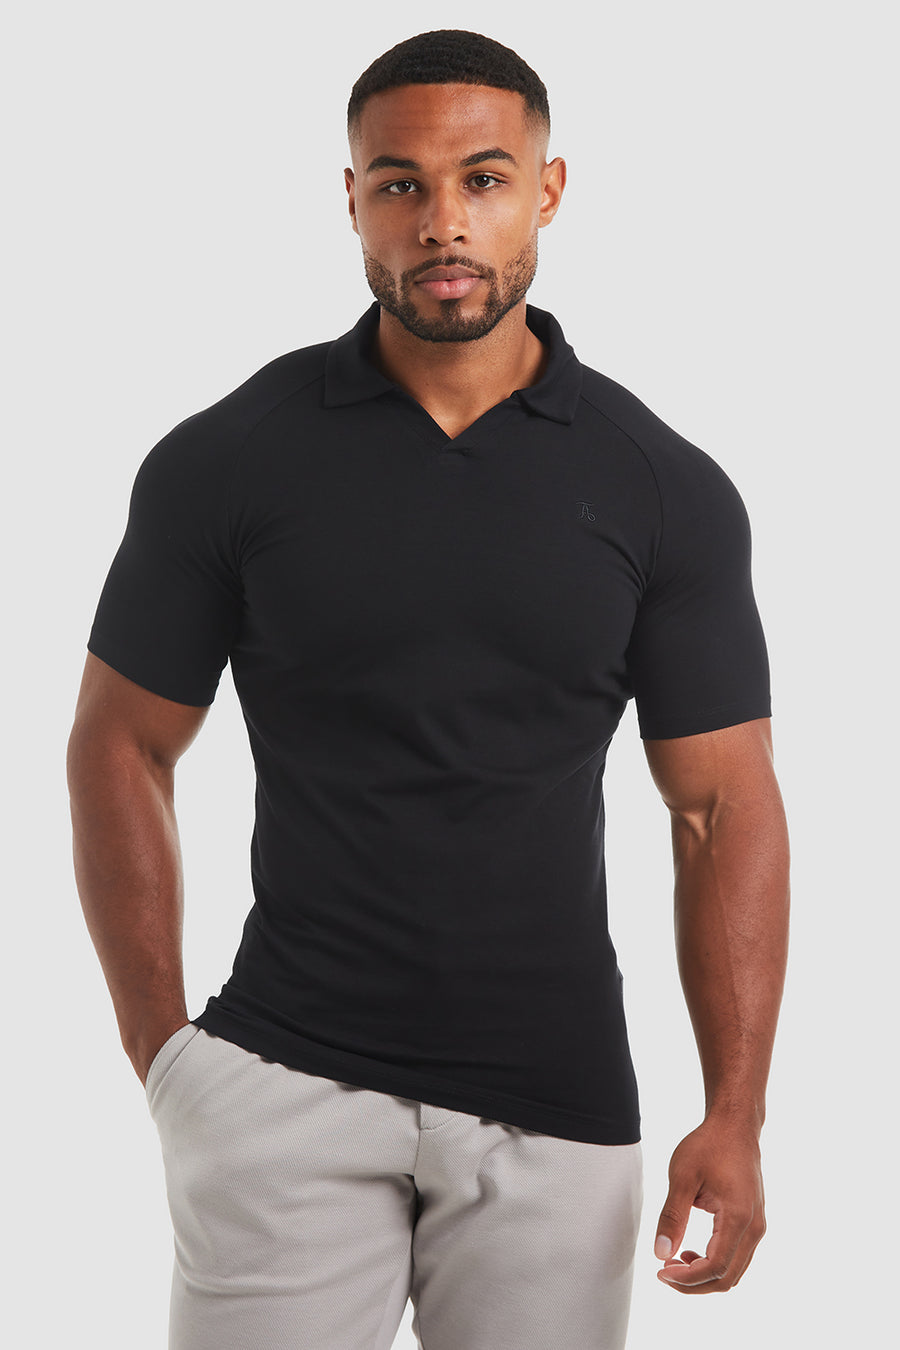 Jersey Buttonless Polo Shirt in Black - TAILORED ATHLETE - USA